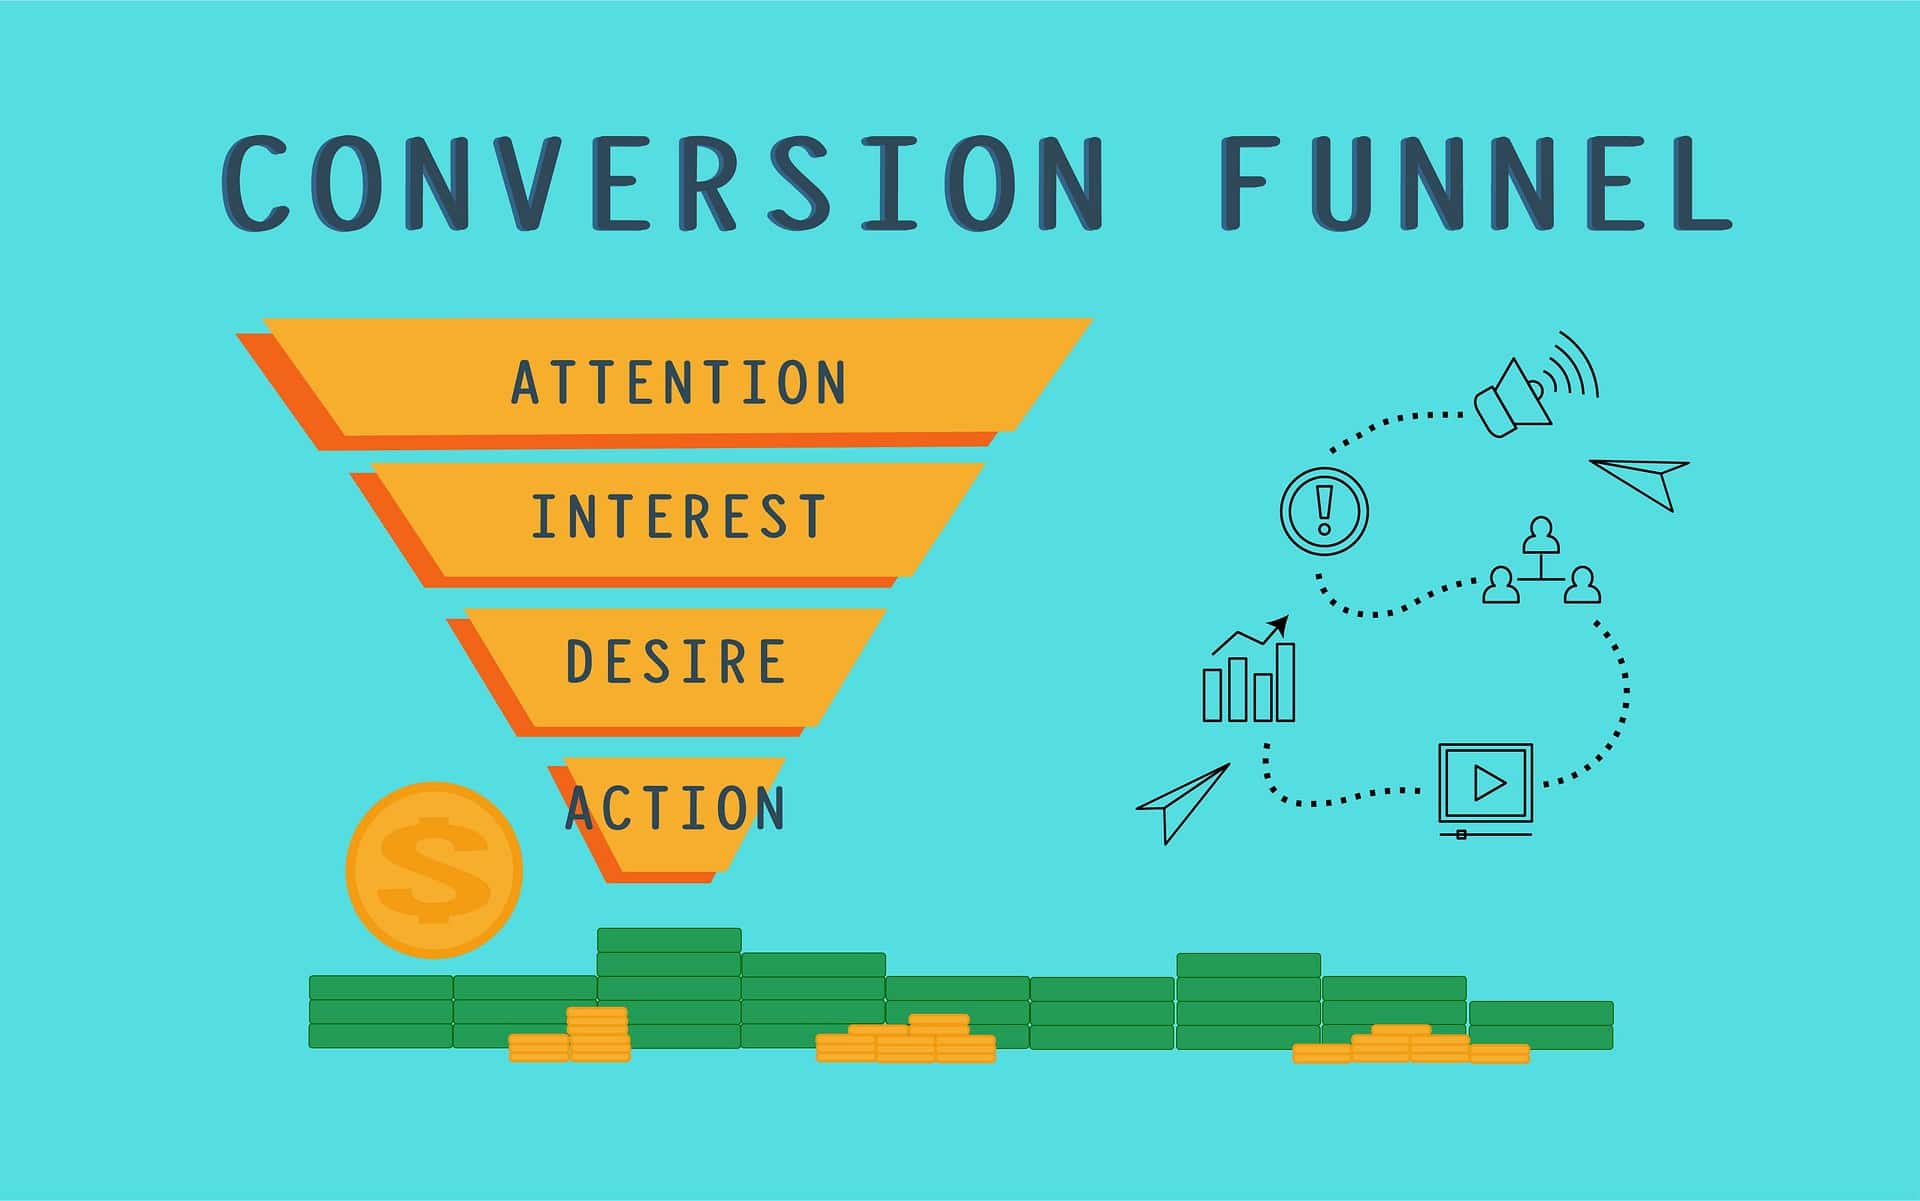 Image depicting stages of an eCommerce sales and conversion funnel